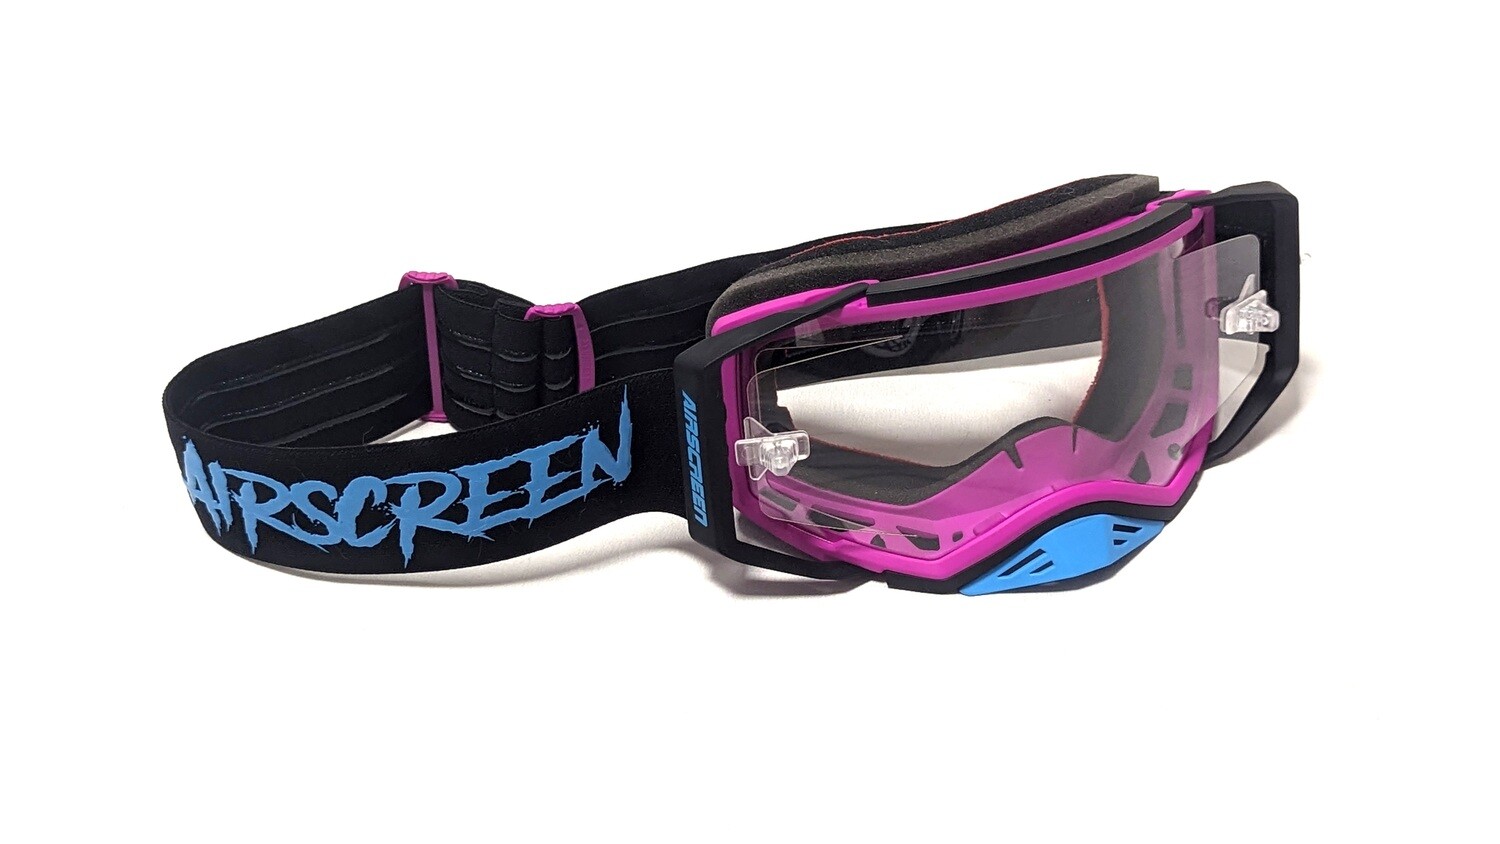 AirScreen AERO 01 EX goggle with openning lens